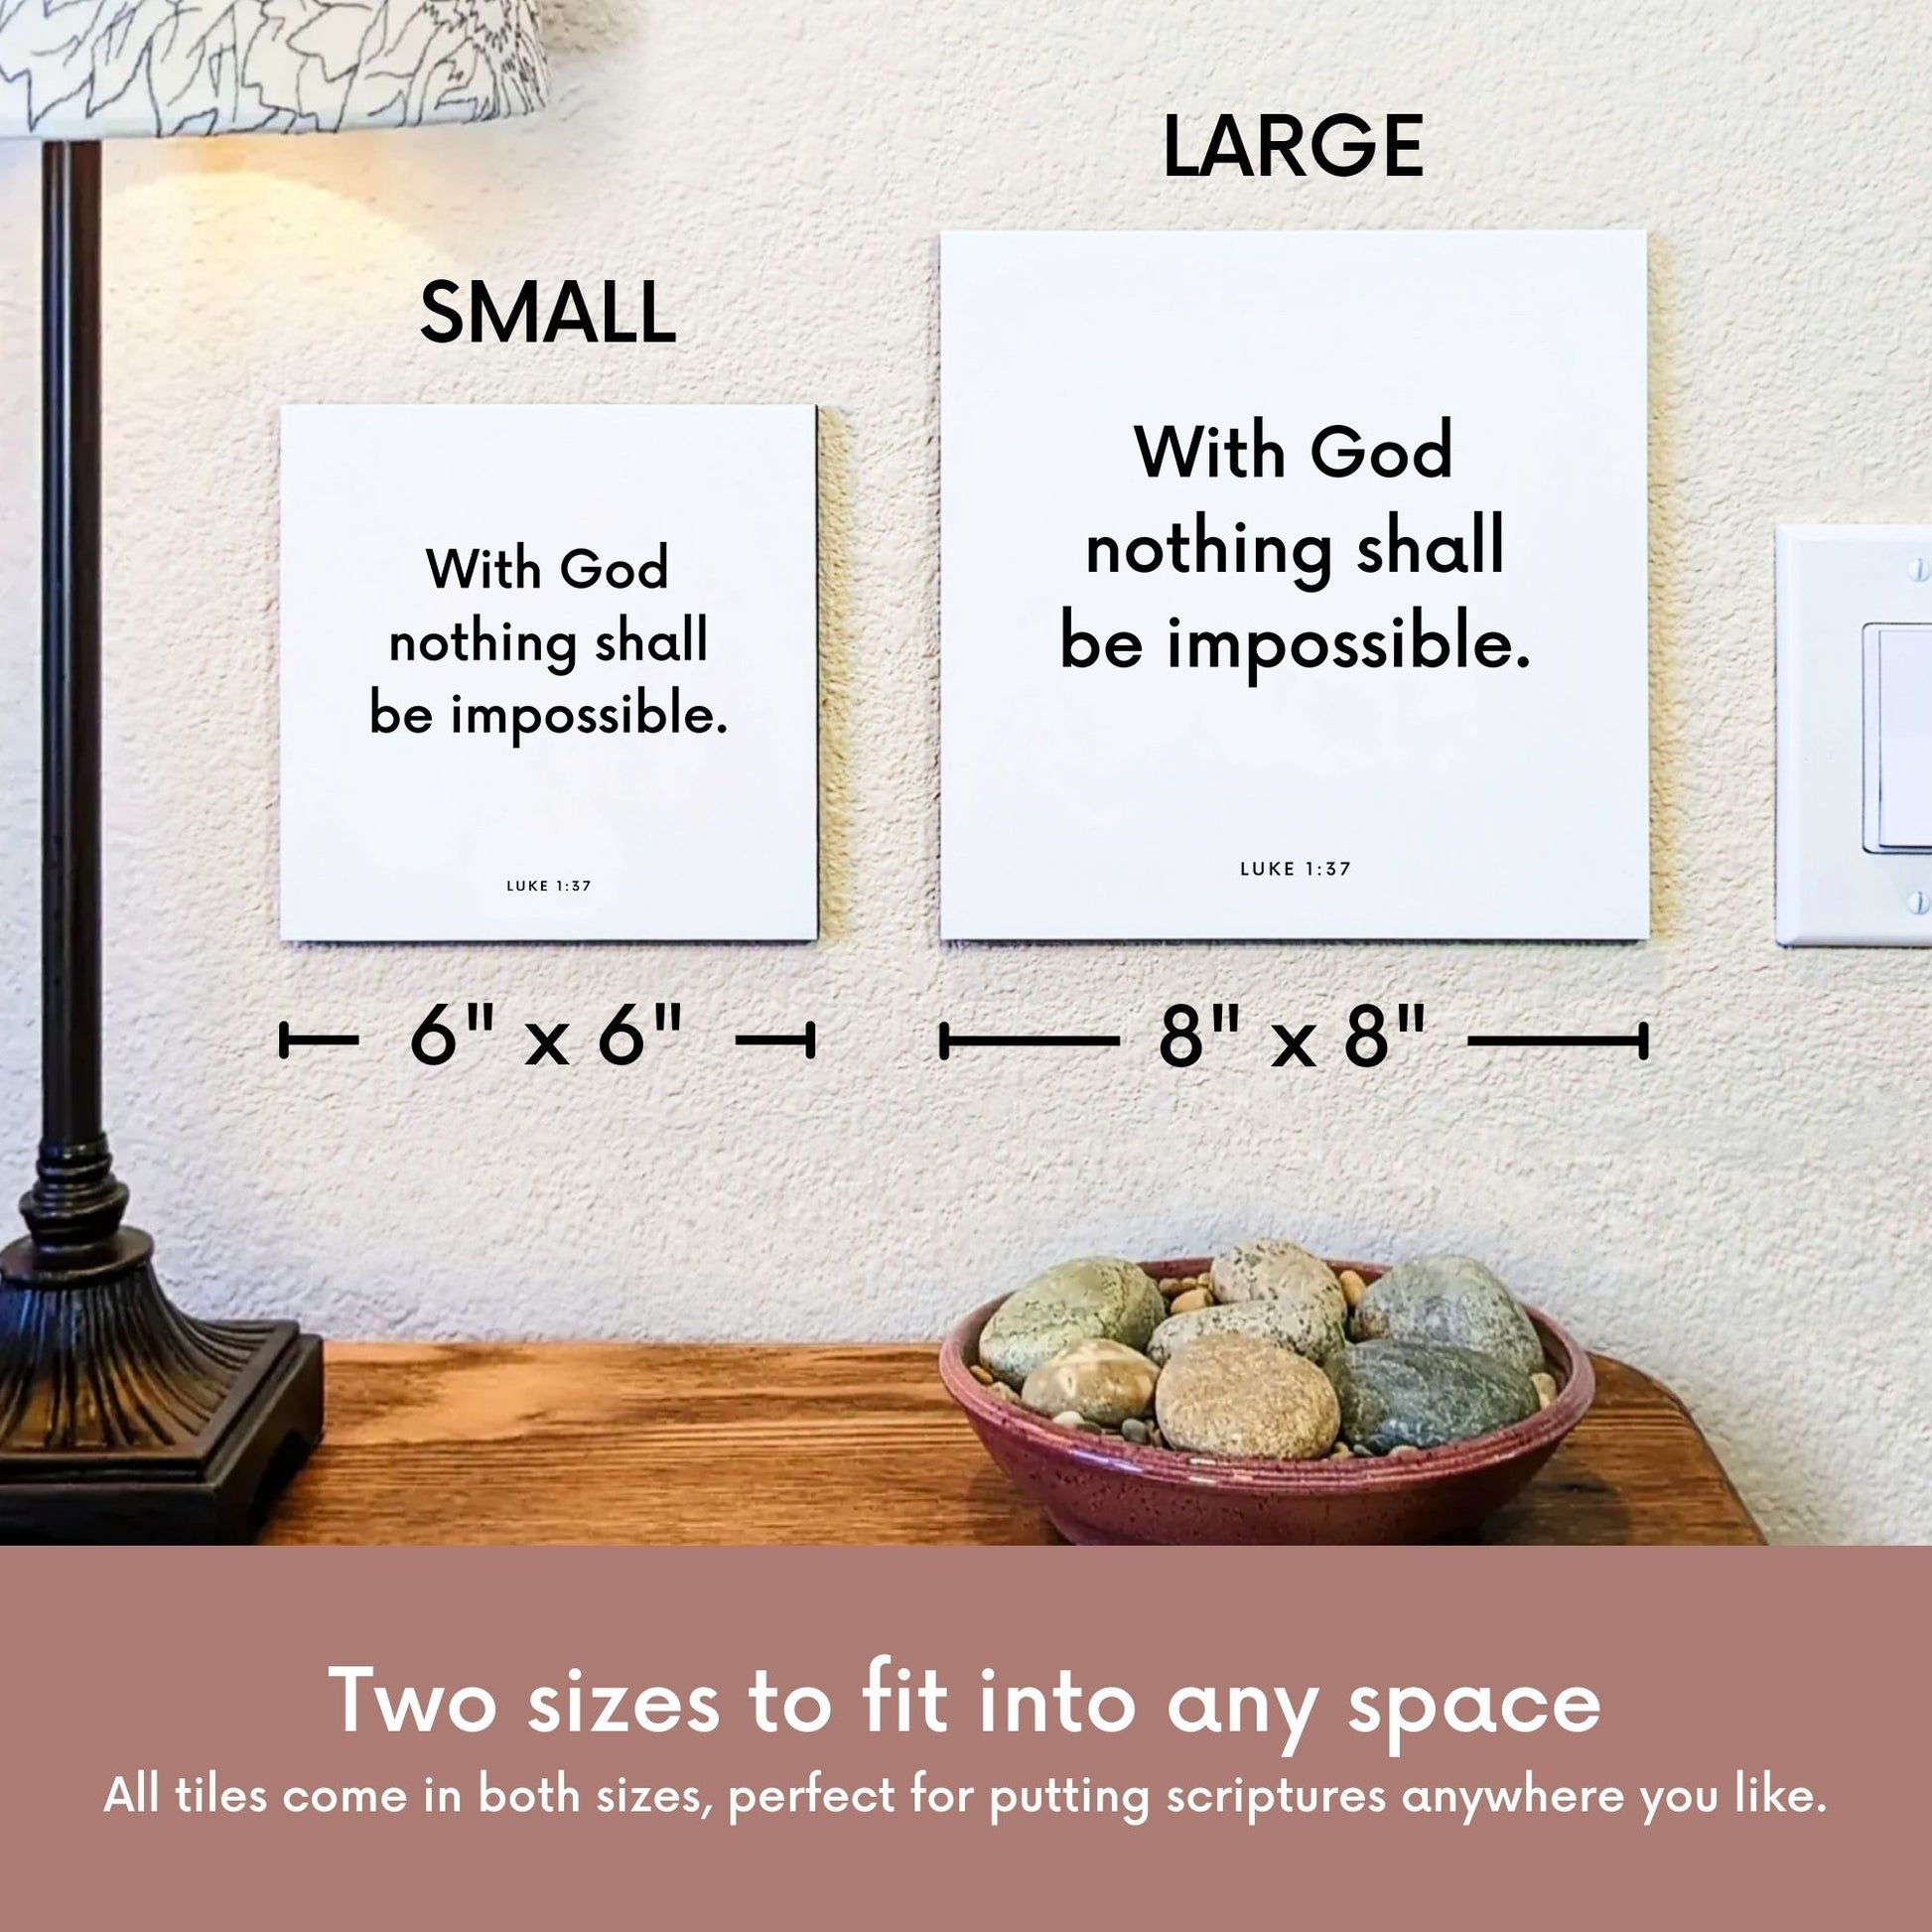 Scripture tile size comparison for Luke 1:37 - "With God nothing shall be impossible"